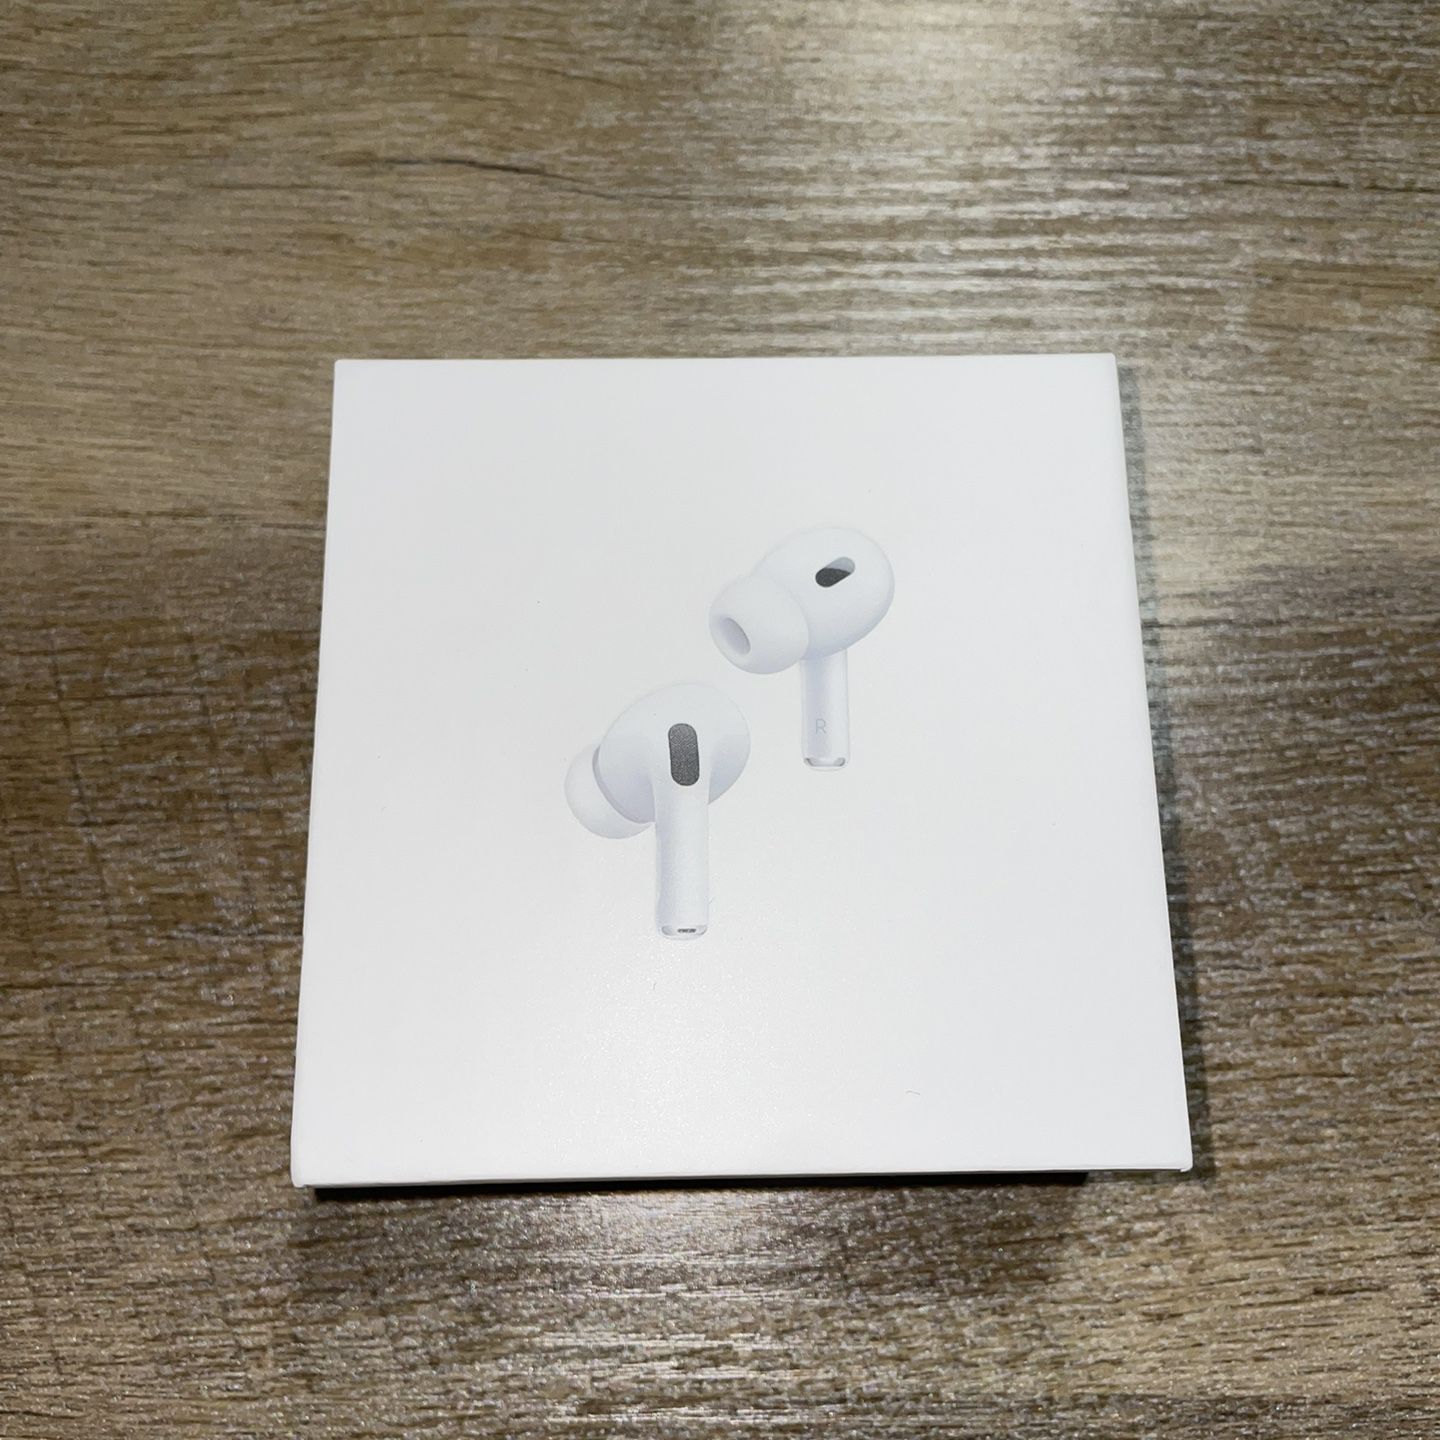 AirPods Pro For Sale